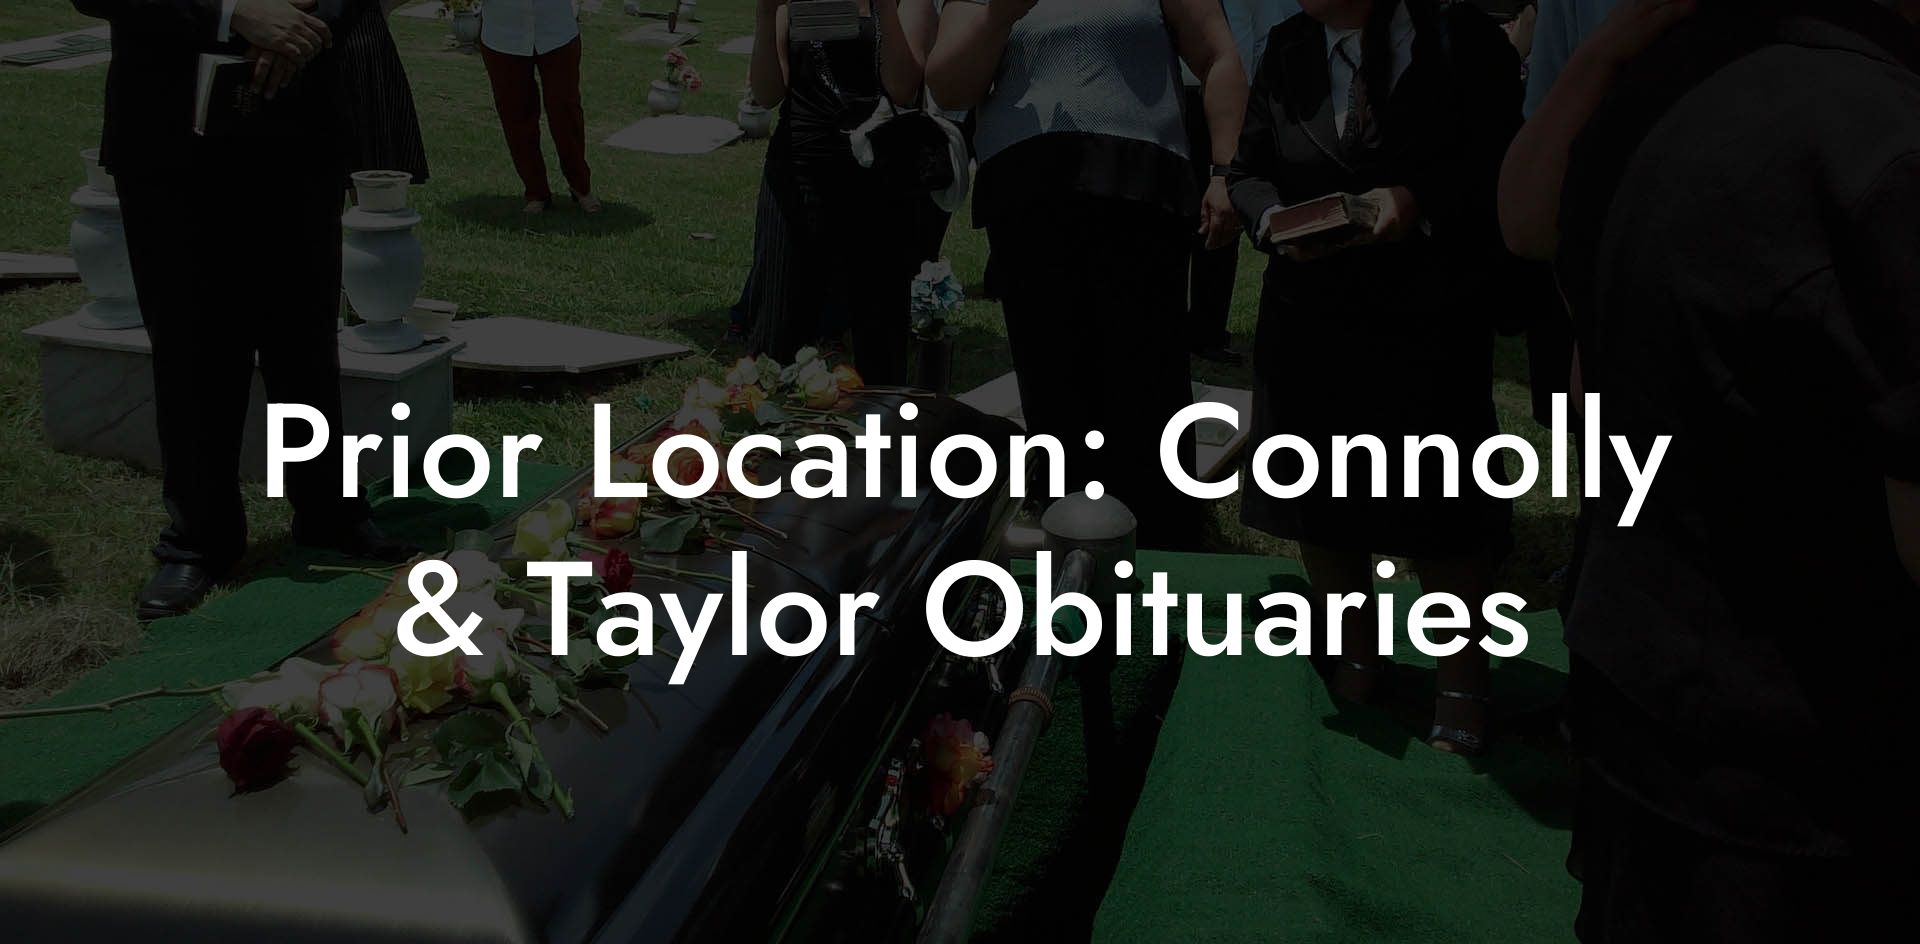 Prior Location: Connolly & Taylor Obituaries